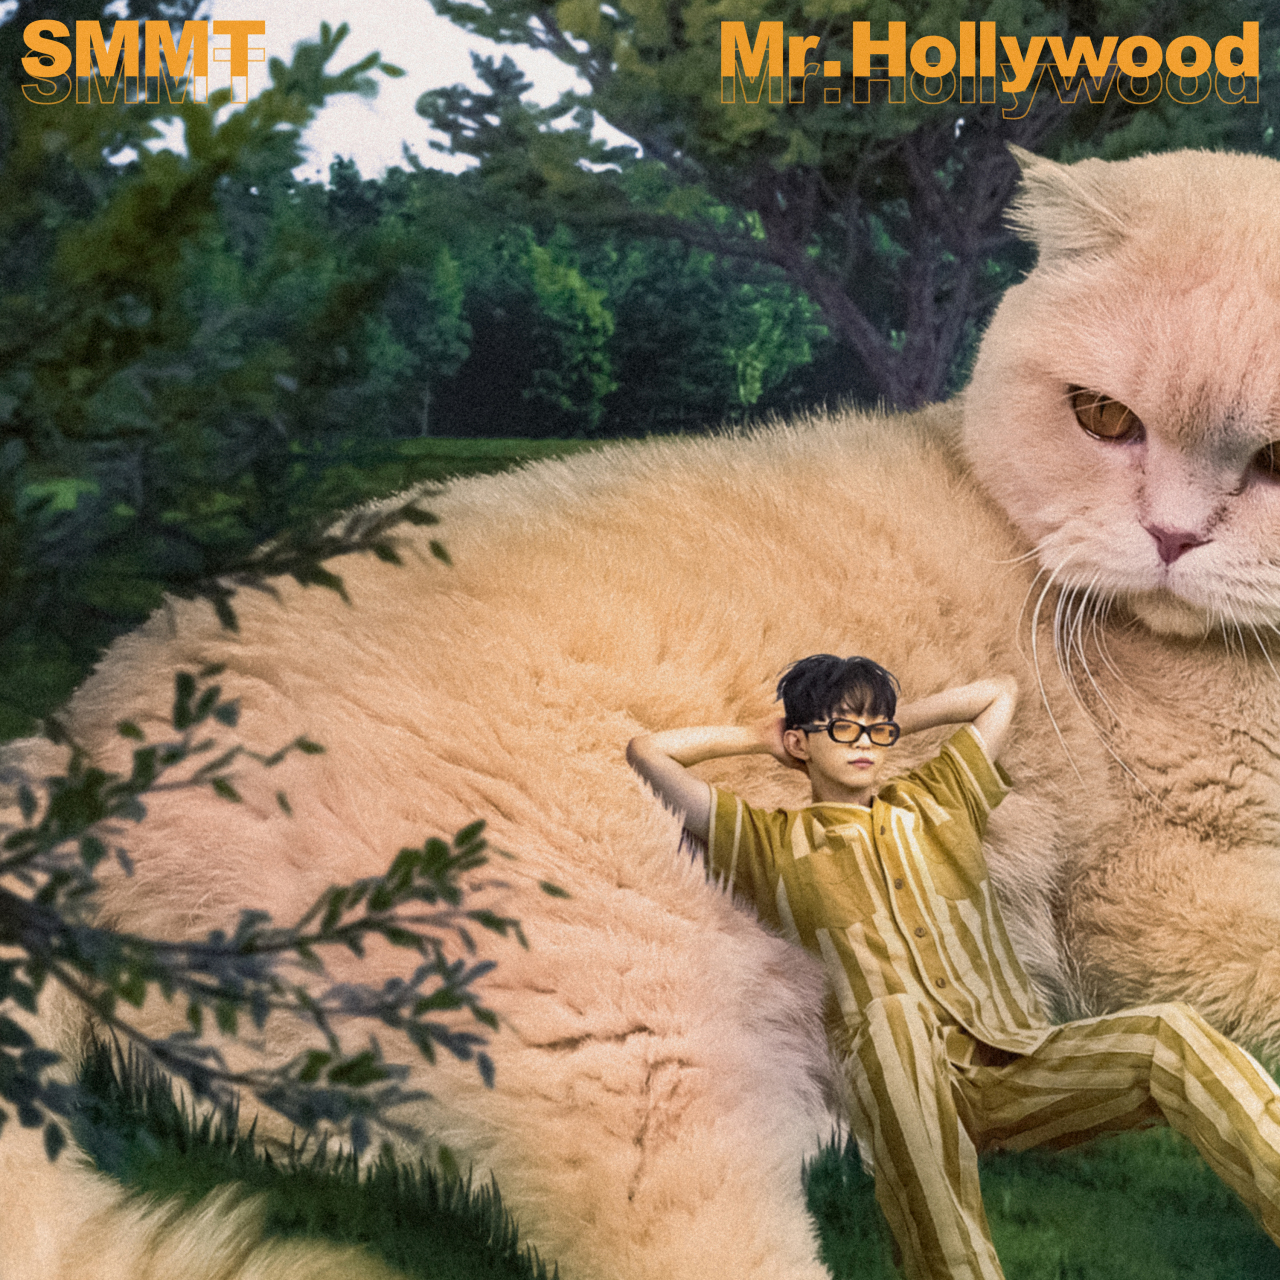 Album cover of SMMT’s first EP, “Mr. Hollywood” (H1ghr Music)